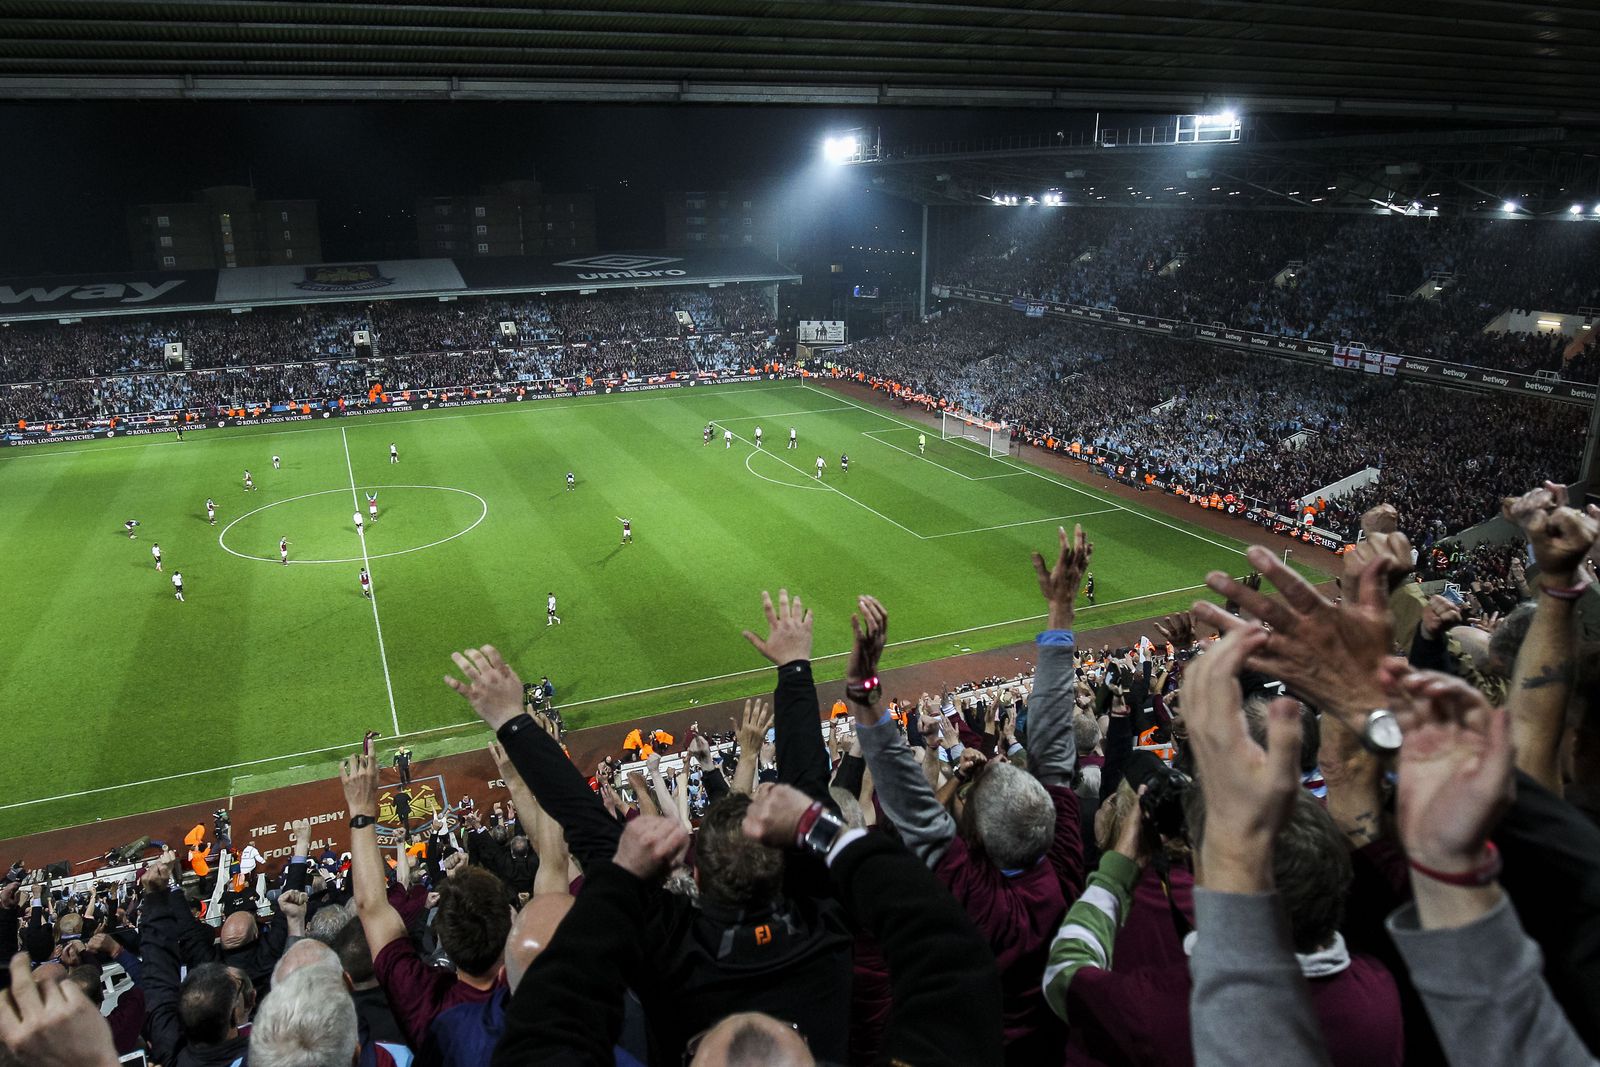 West Ham fans celebrate at the final whistle of the last ever match at the Boleyn. I applied for accreditation but I was refused, so not wanting to miss out on the last match I bought a ticket and shot this from my seat at the final whistle. (16mm, ISO2500, 1/640th, f4)